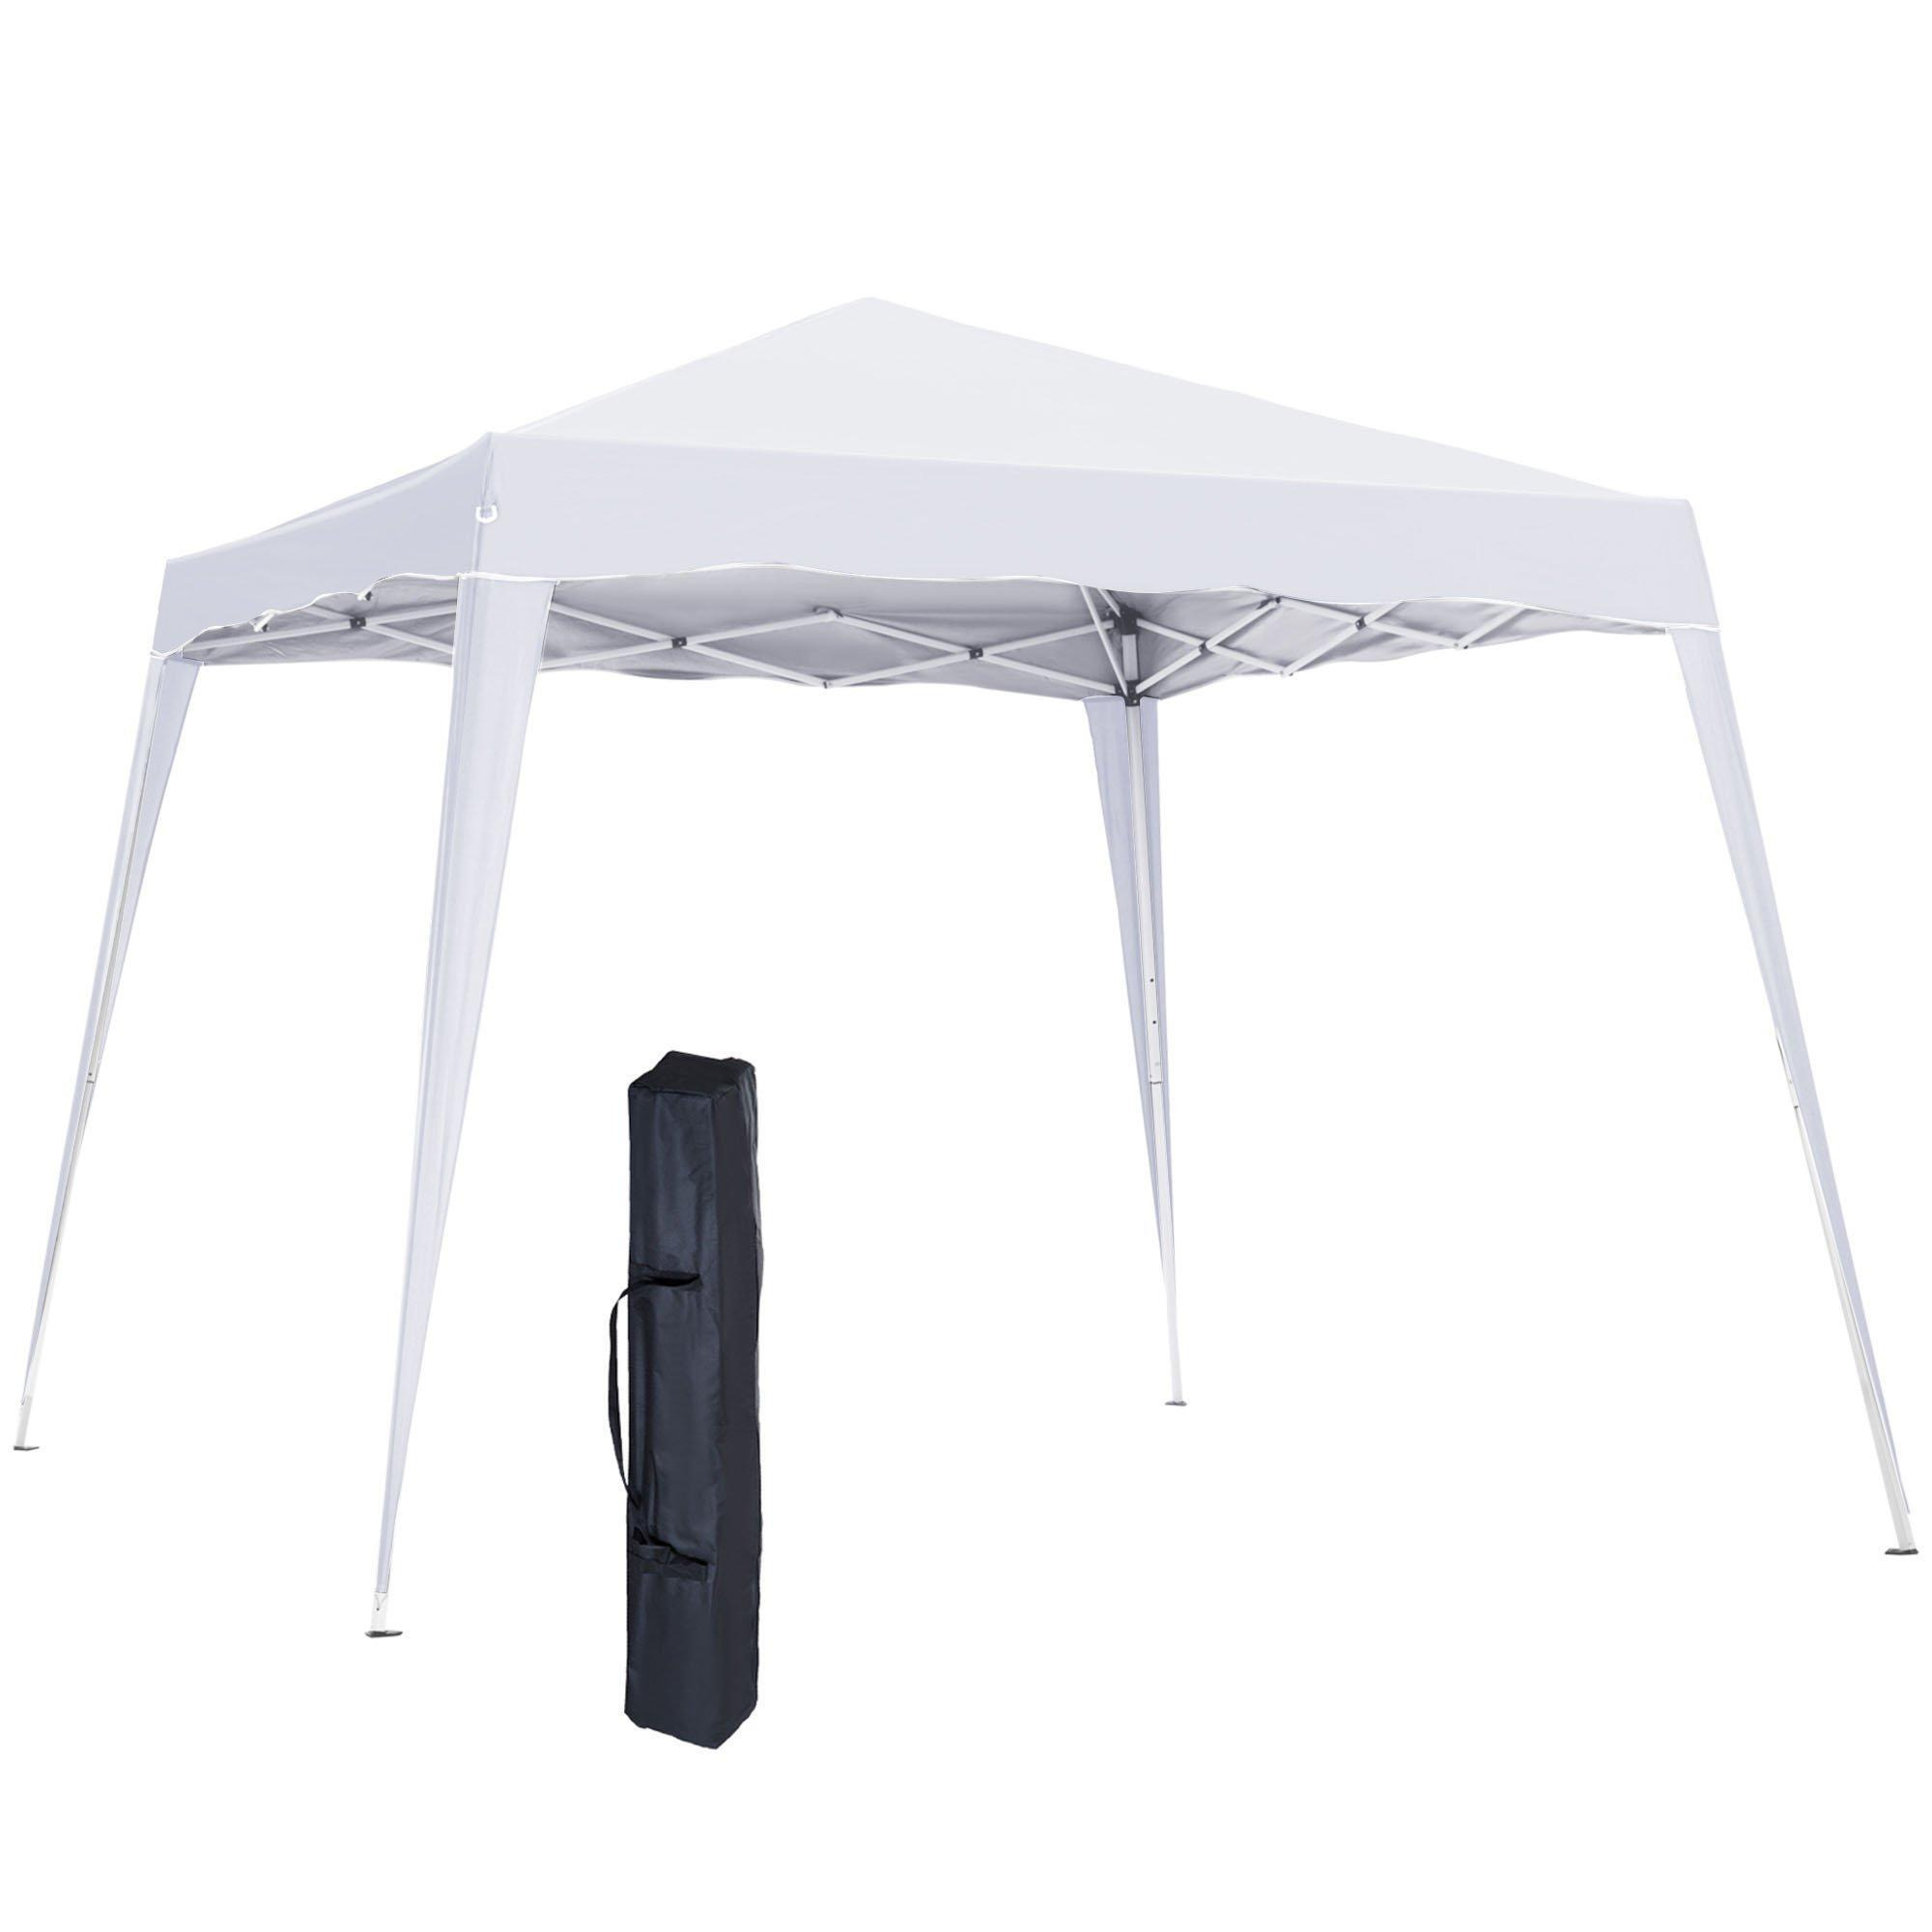 Garden Pop up Gazebo Tent Marquee Party Water-resistant 2.5 x 2.5M - image 1